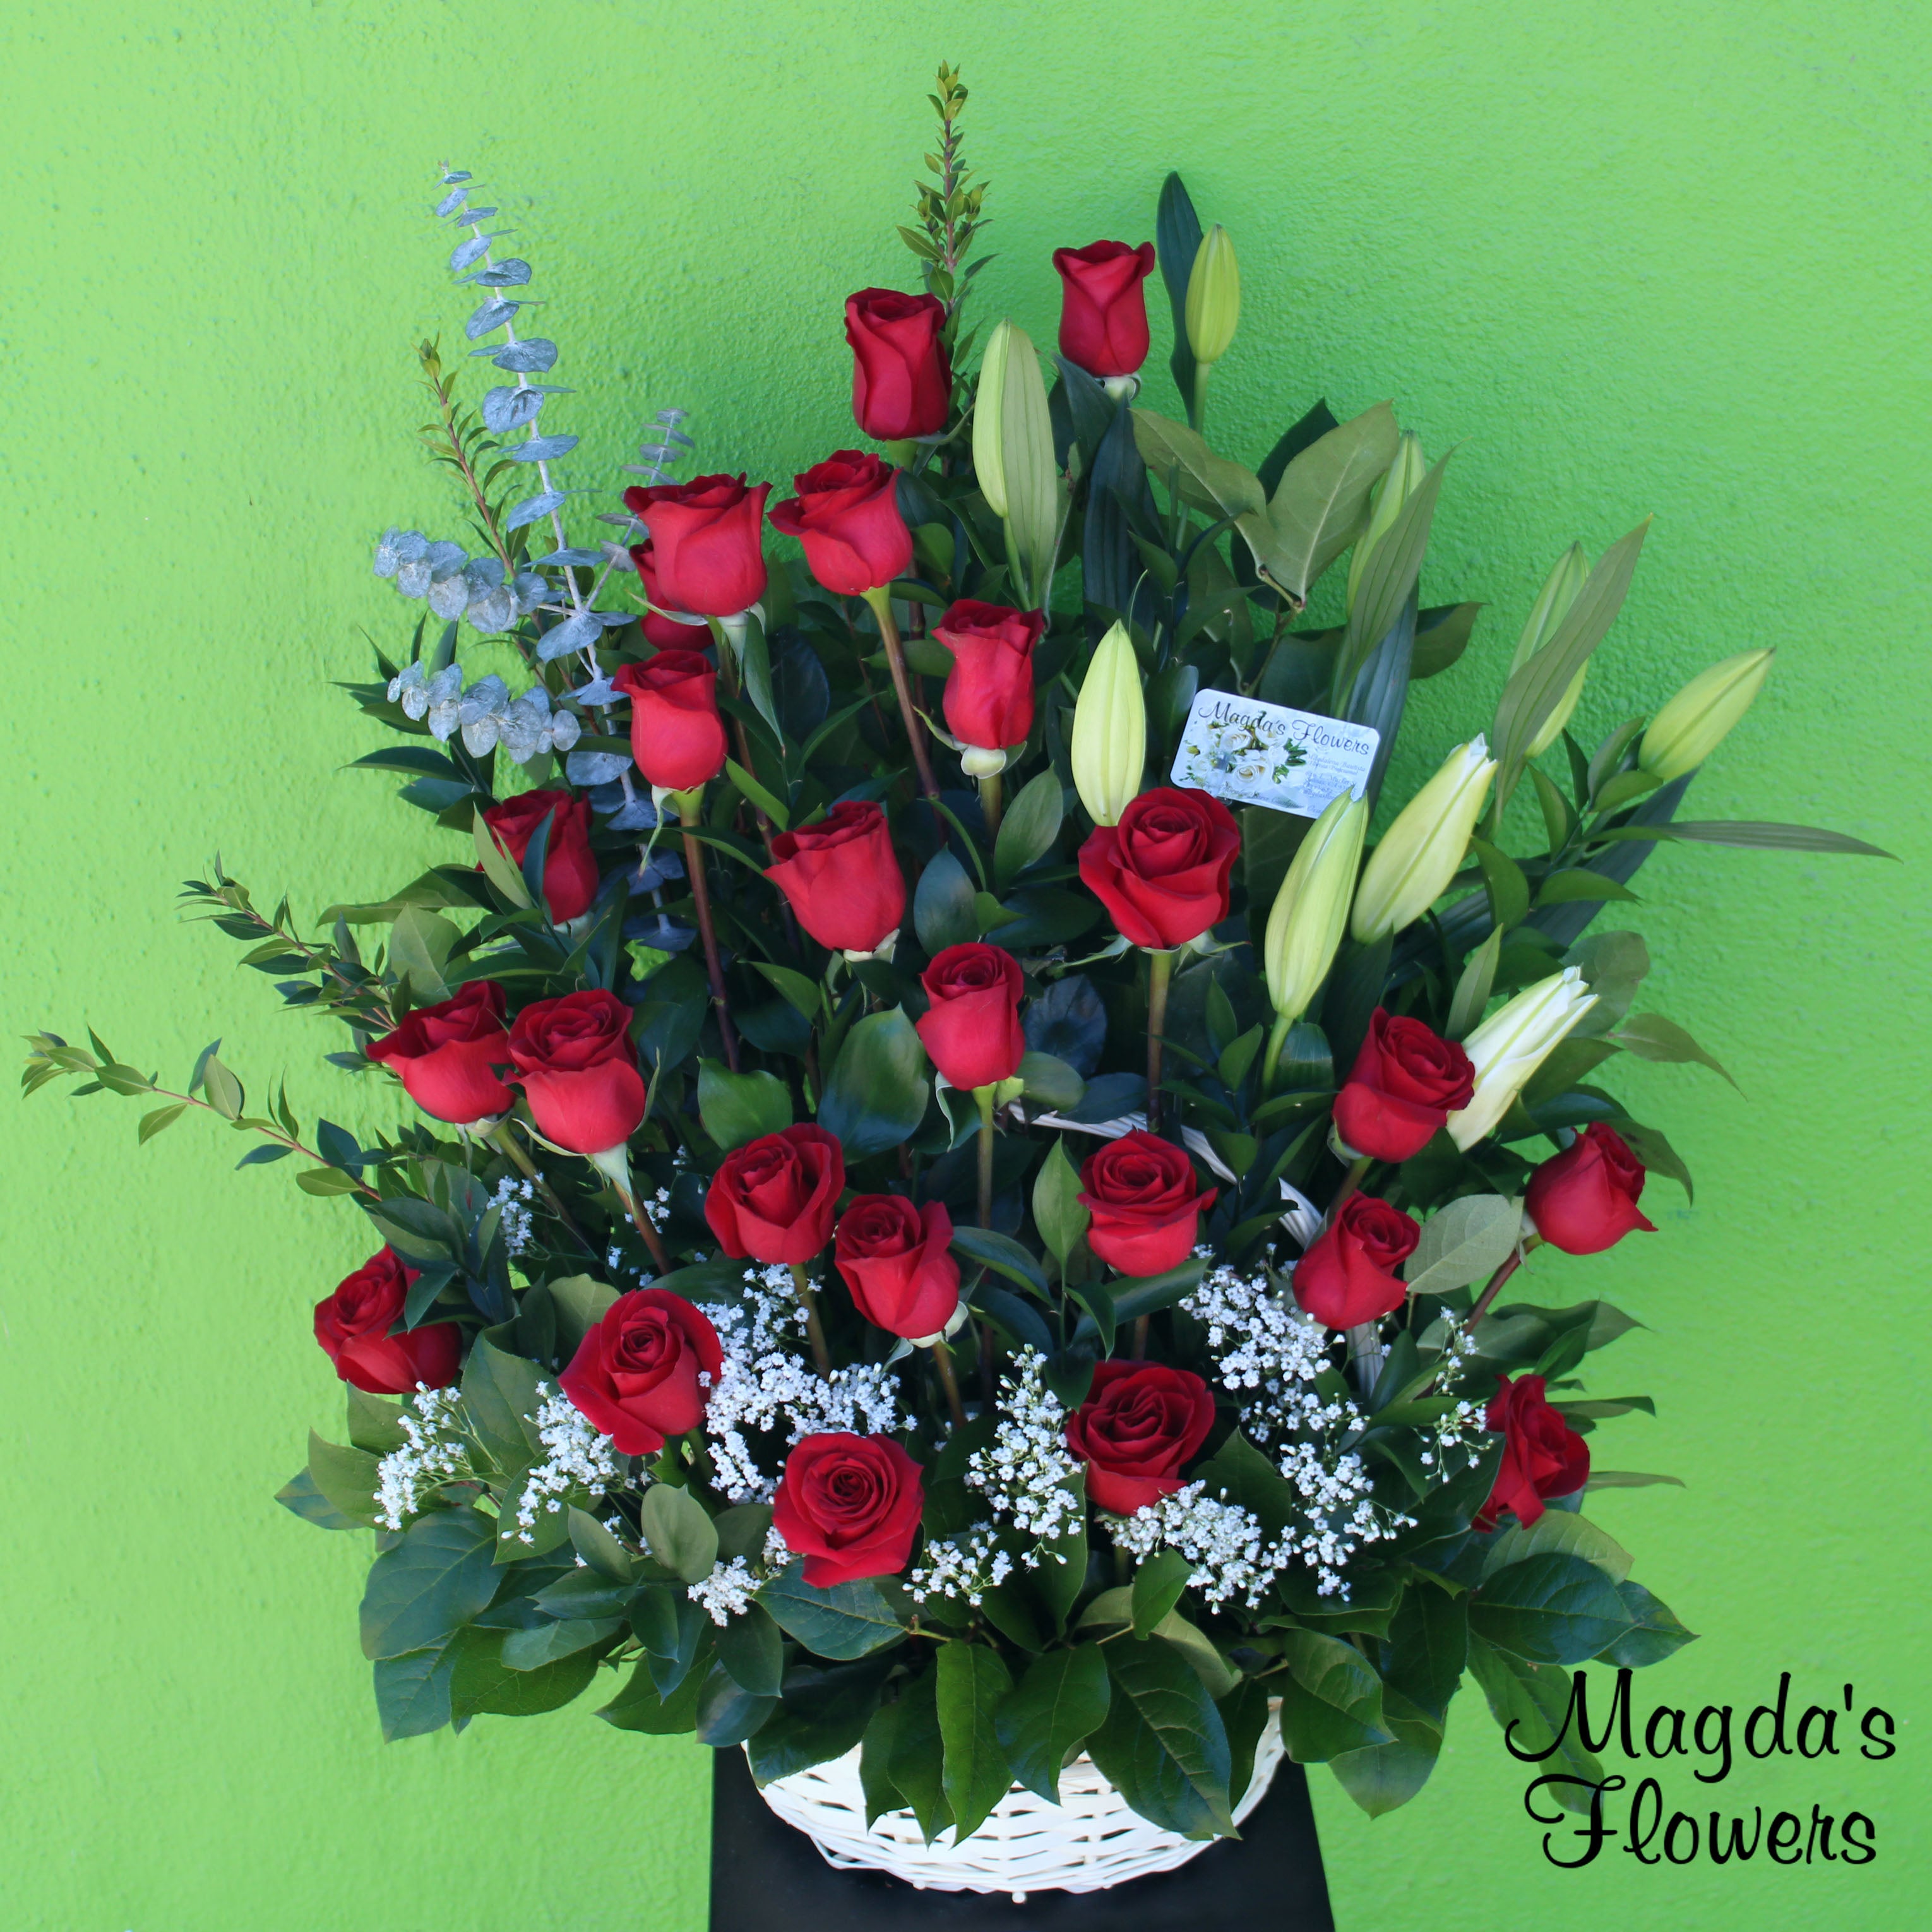 Amor Florido - This floral basket is a great way to show your love, it features a beautiful mix of red roses, white lilies, eucalyptus stems, myrtle stems and lush greenery, that together create a stunning bouquet, all nestled in a natural wicker basket, it's perfect for any occasion that calls for a romantic gesture.